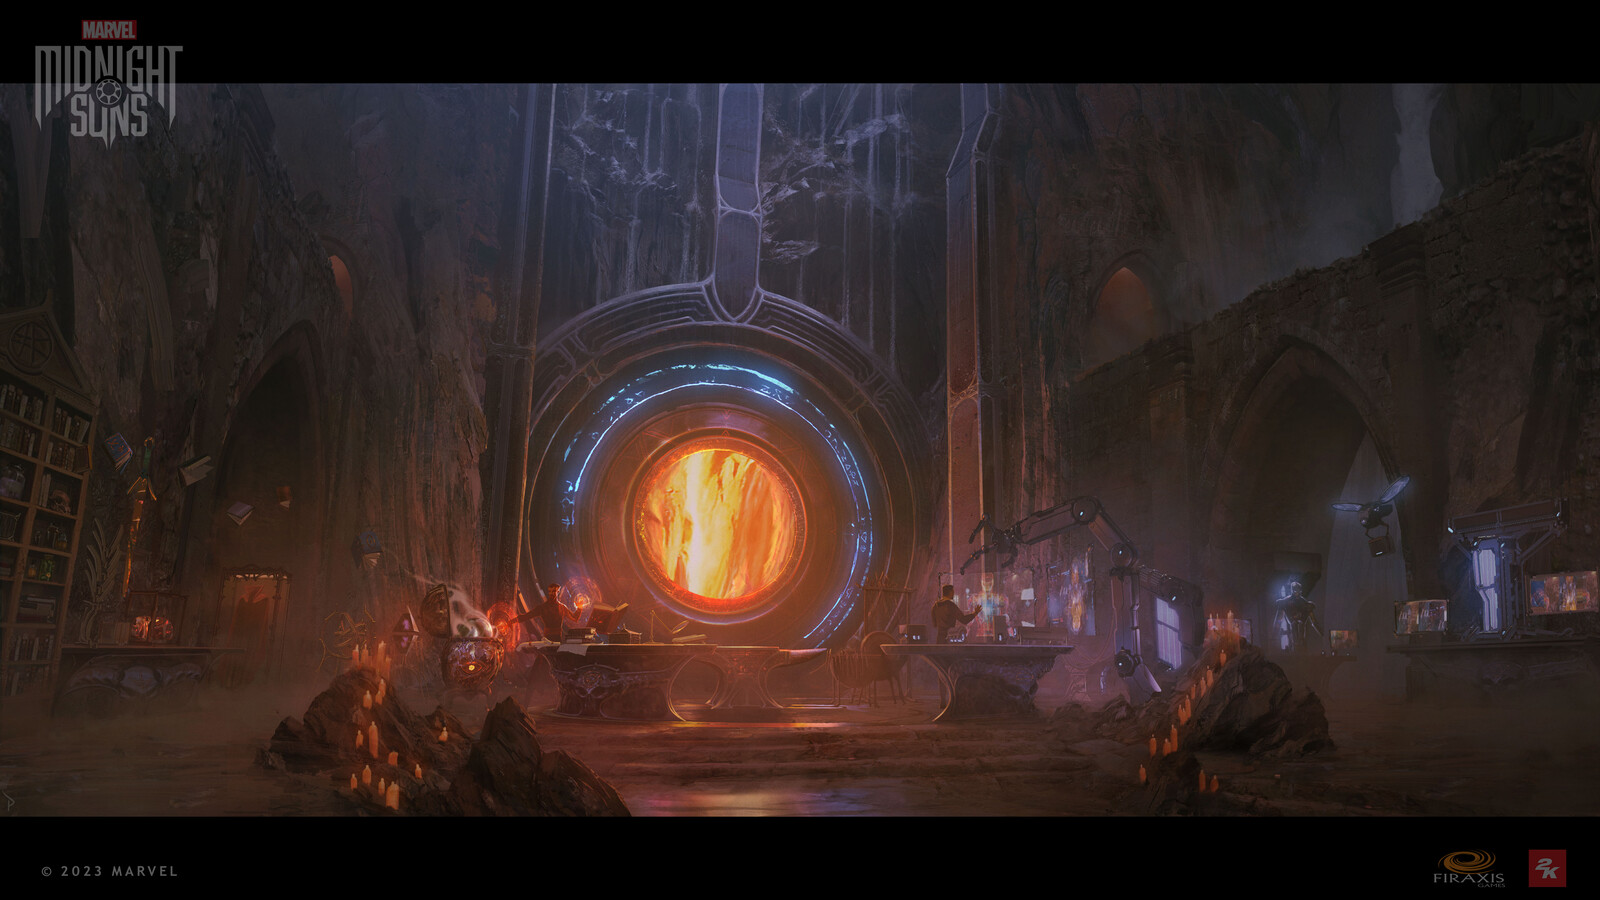 The Abbey Forge, with Dr. Strange's side on the left and Tony Stark's side on the right.